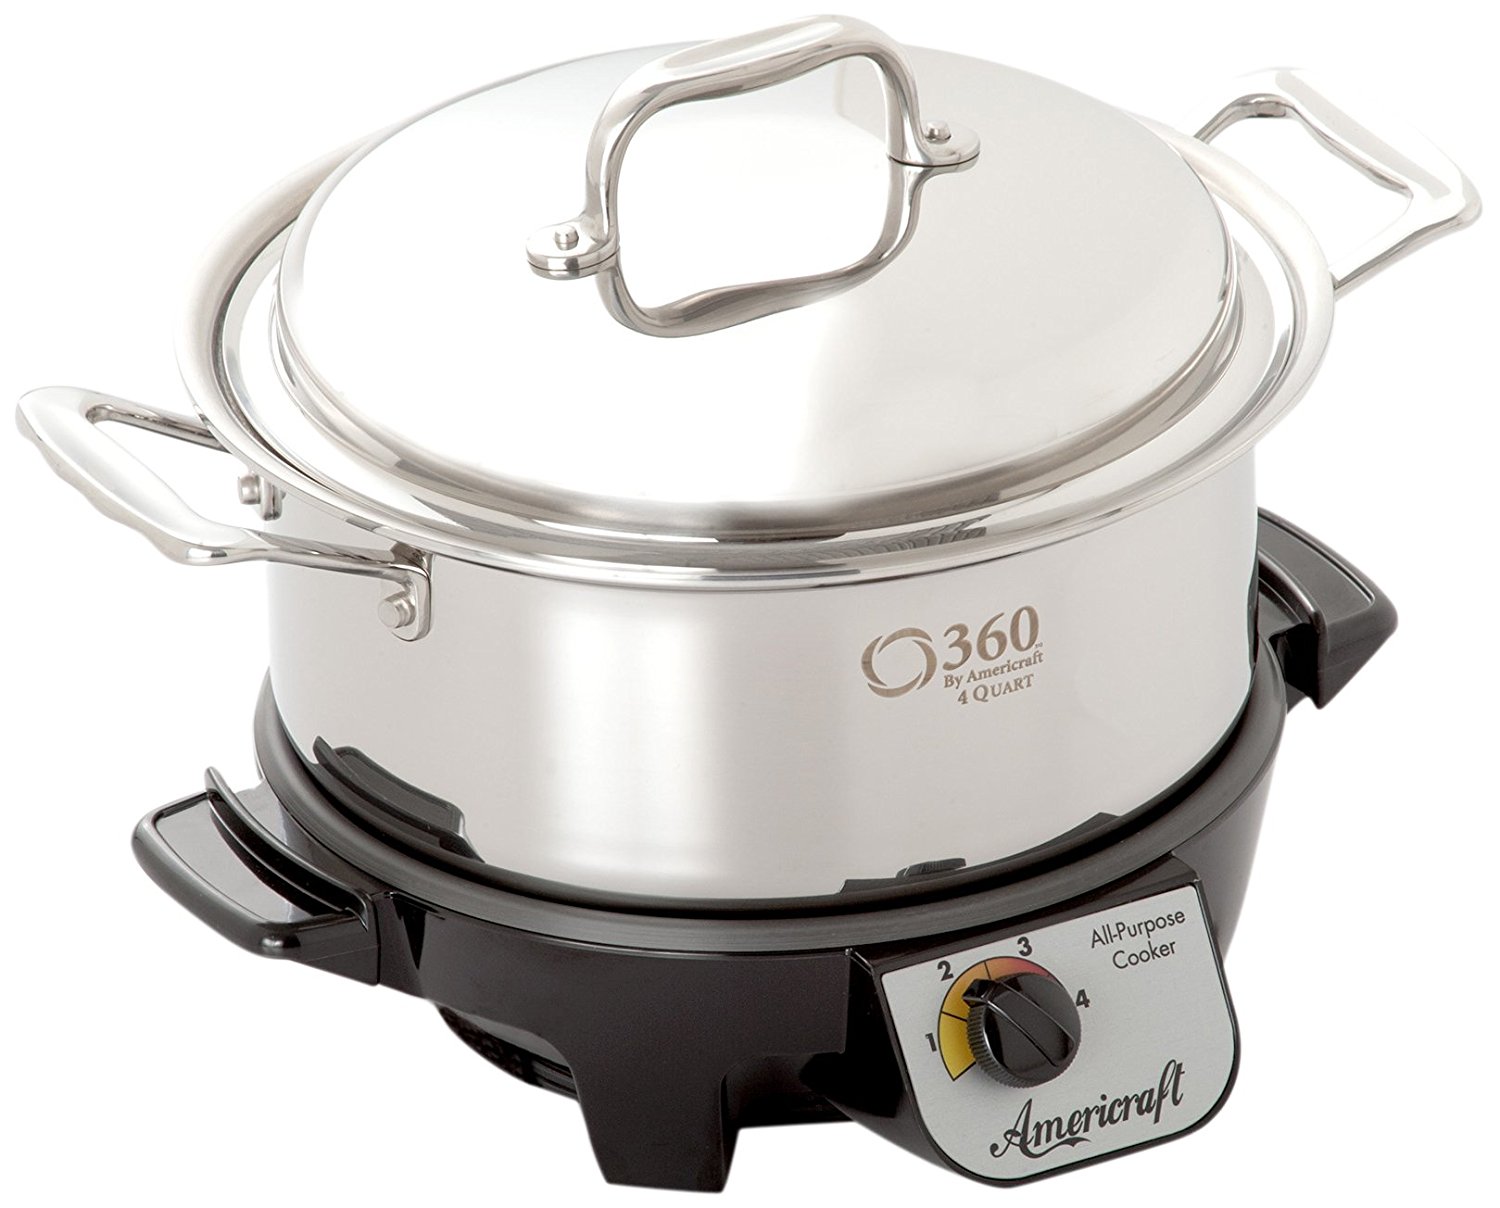 AskTamara: Do you have any recommendations for a non-toxic slow cooker?